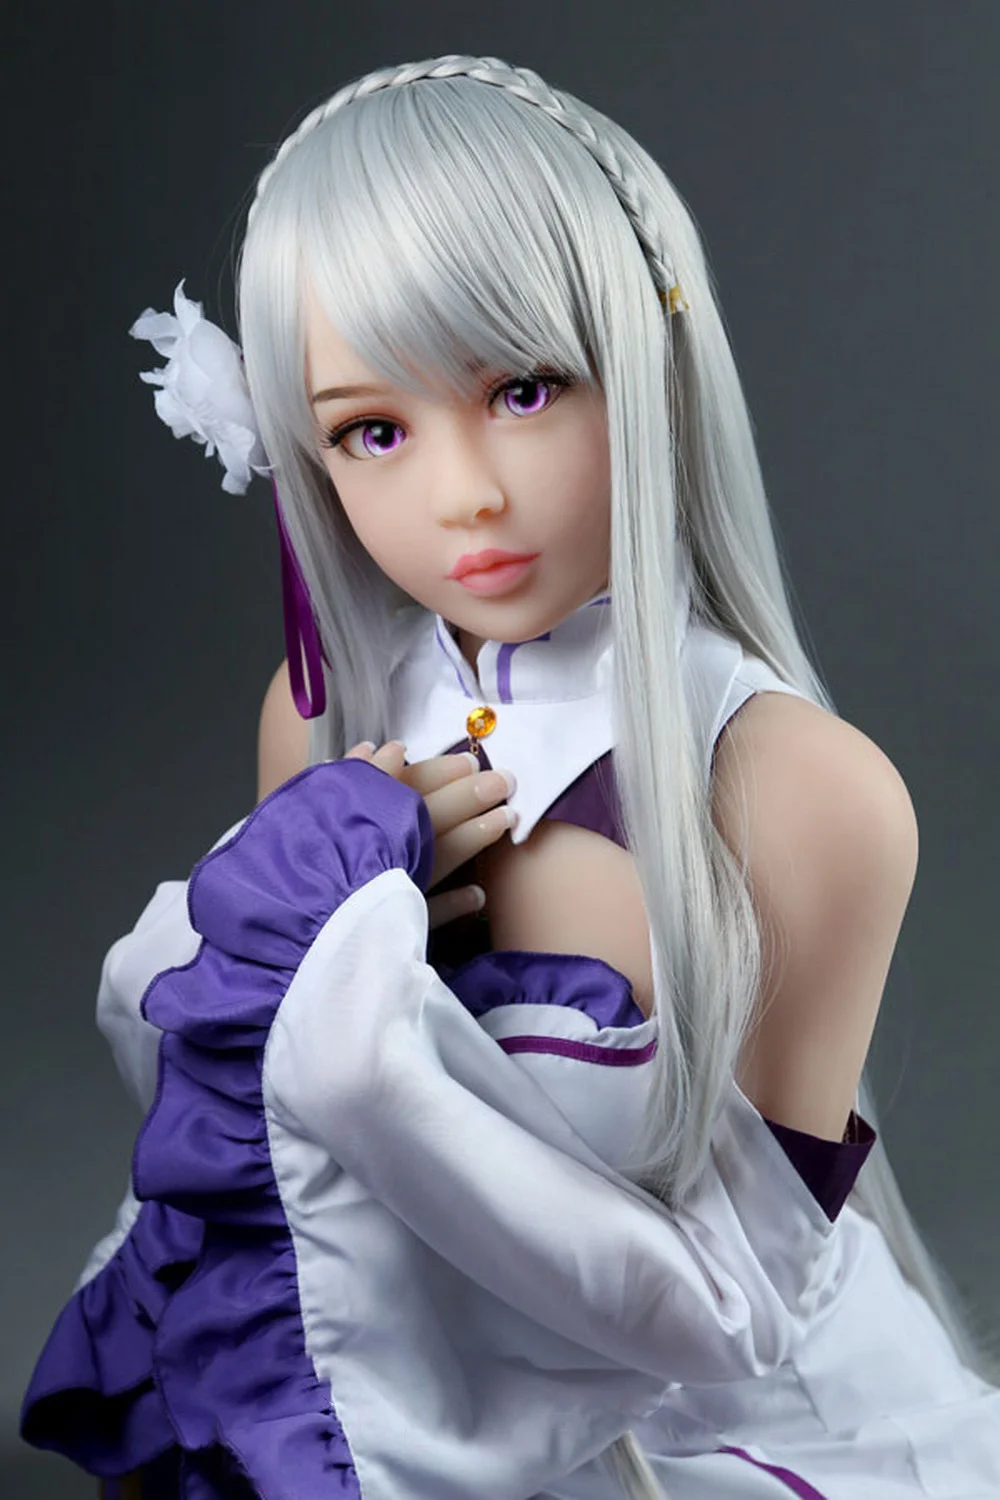 Anime sex doll with purple eyes